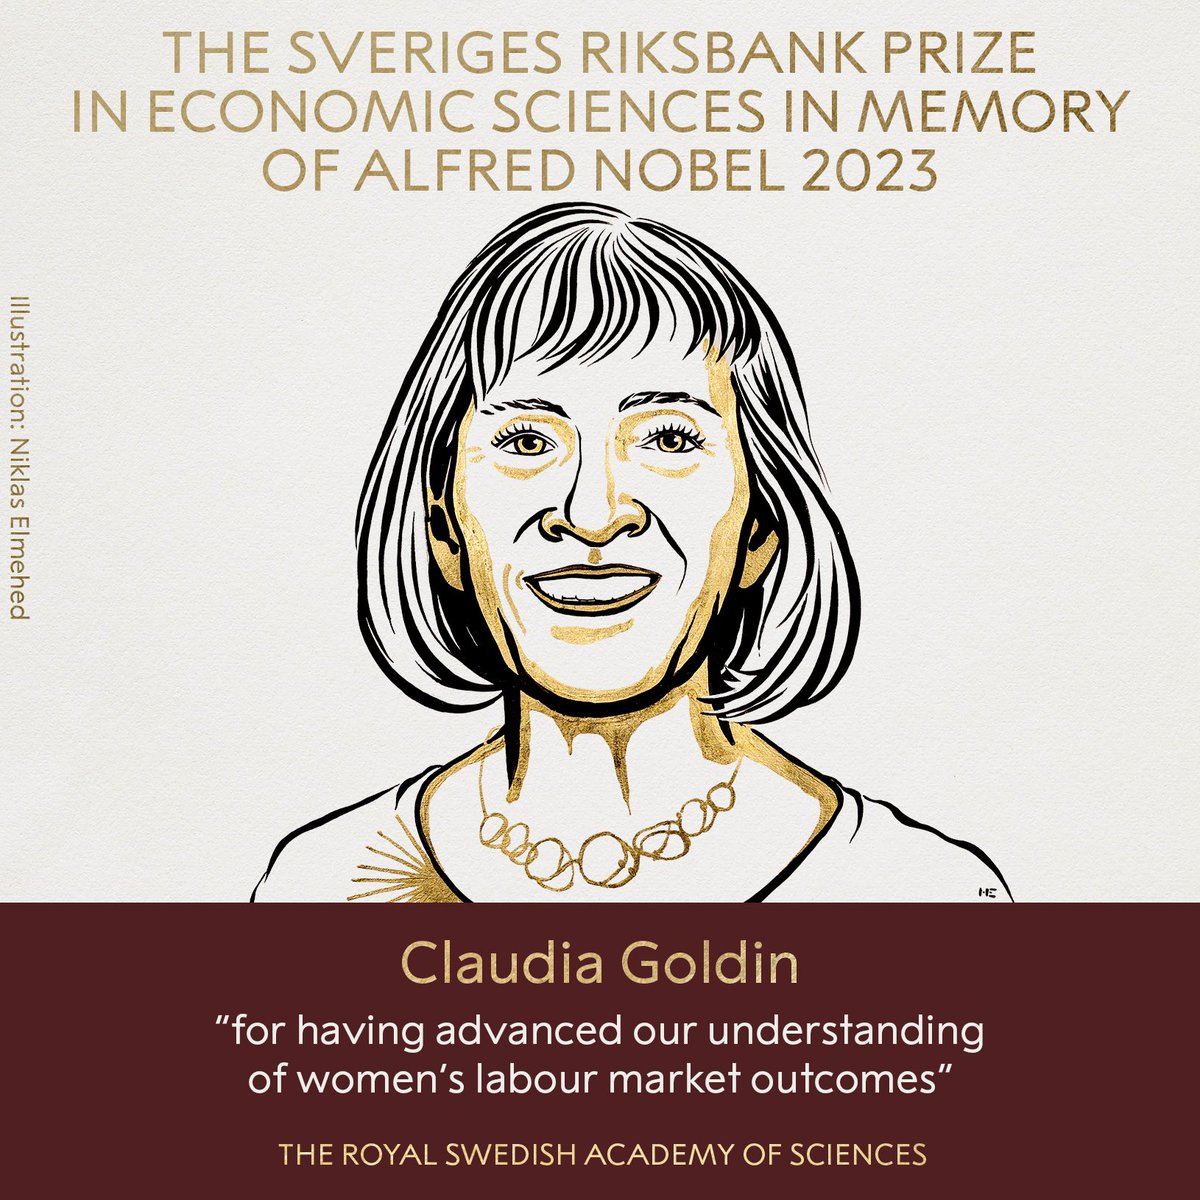 #ClaudiaGoldin The 77 year old academician is the first woman to receive the prize to not share the award with male colleagues 👏👏 She provided the first comprehensive account of women’s earnings and labour market participation through the centuries. She has shown us the nature…